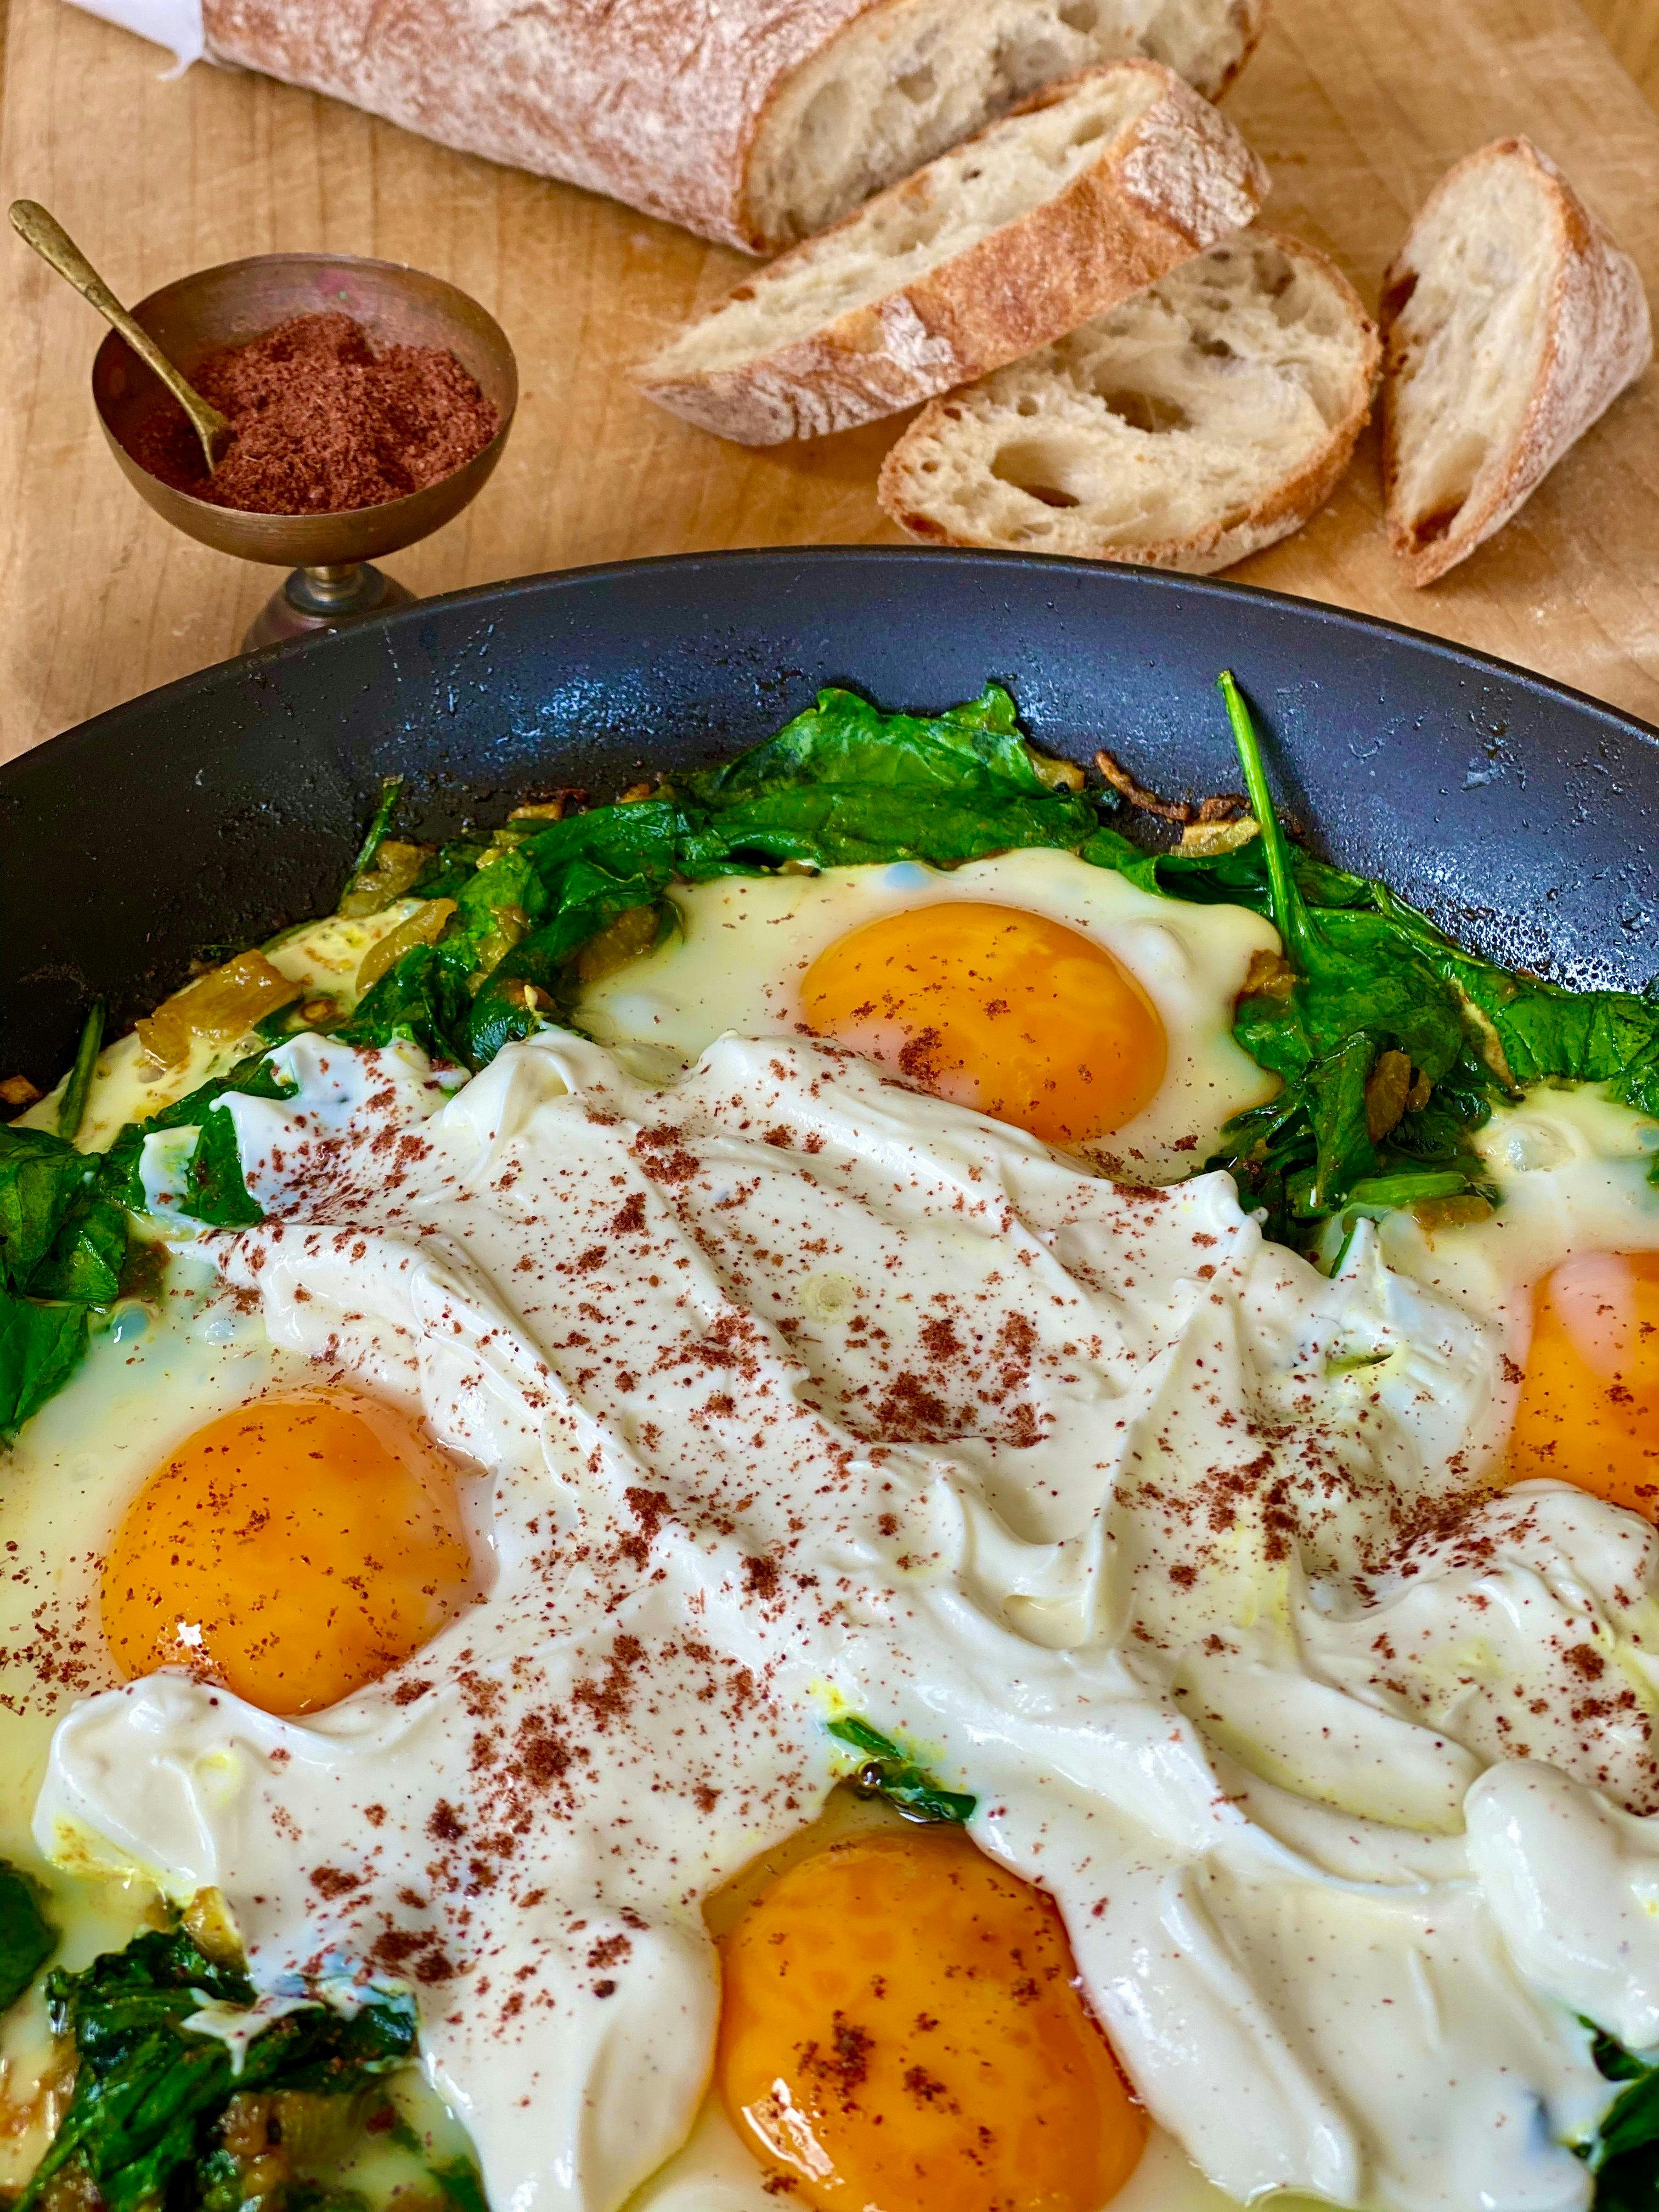 fried eggs with the strained yogurt and sumac